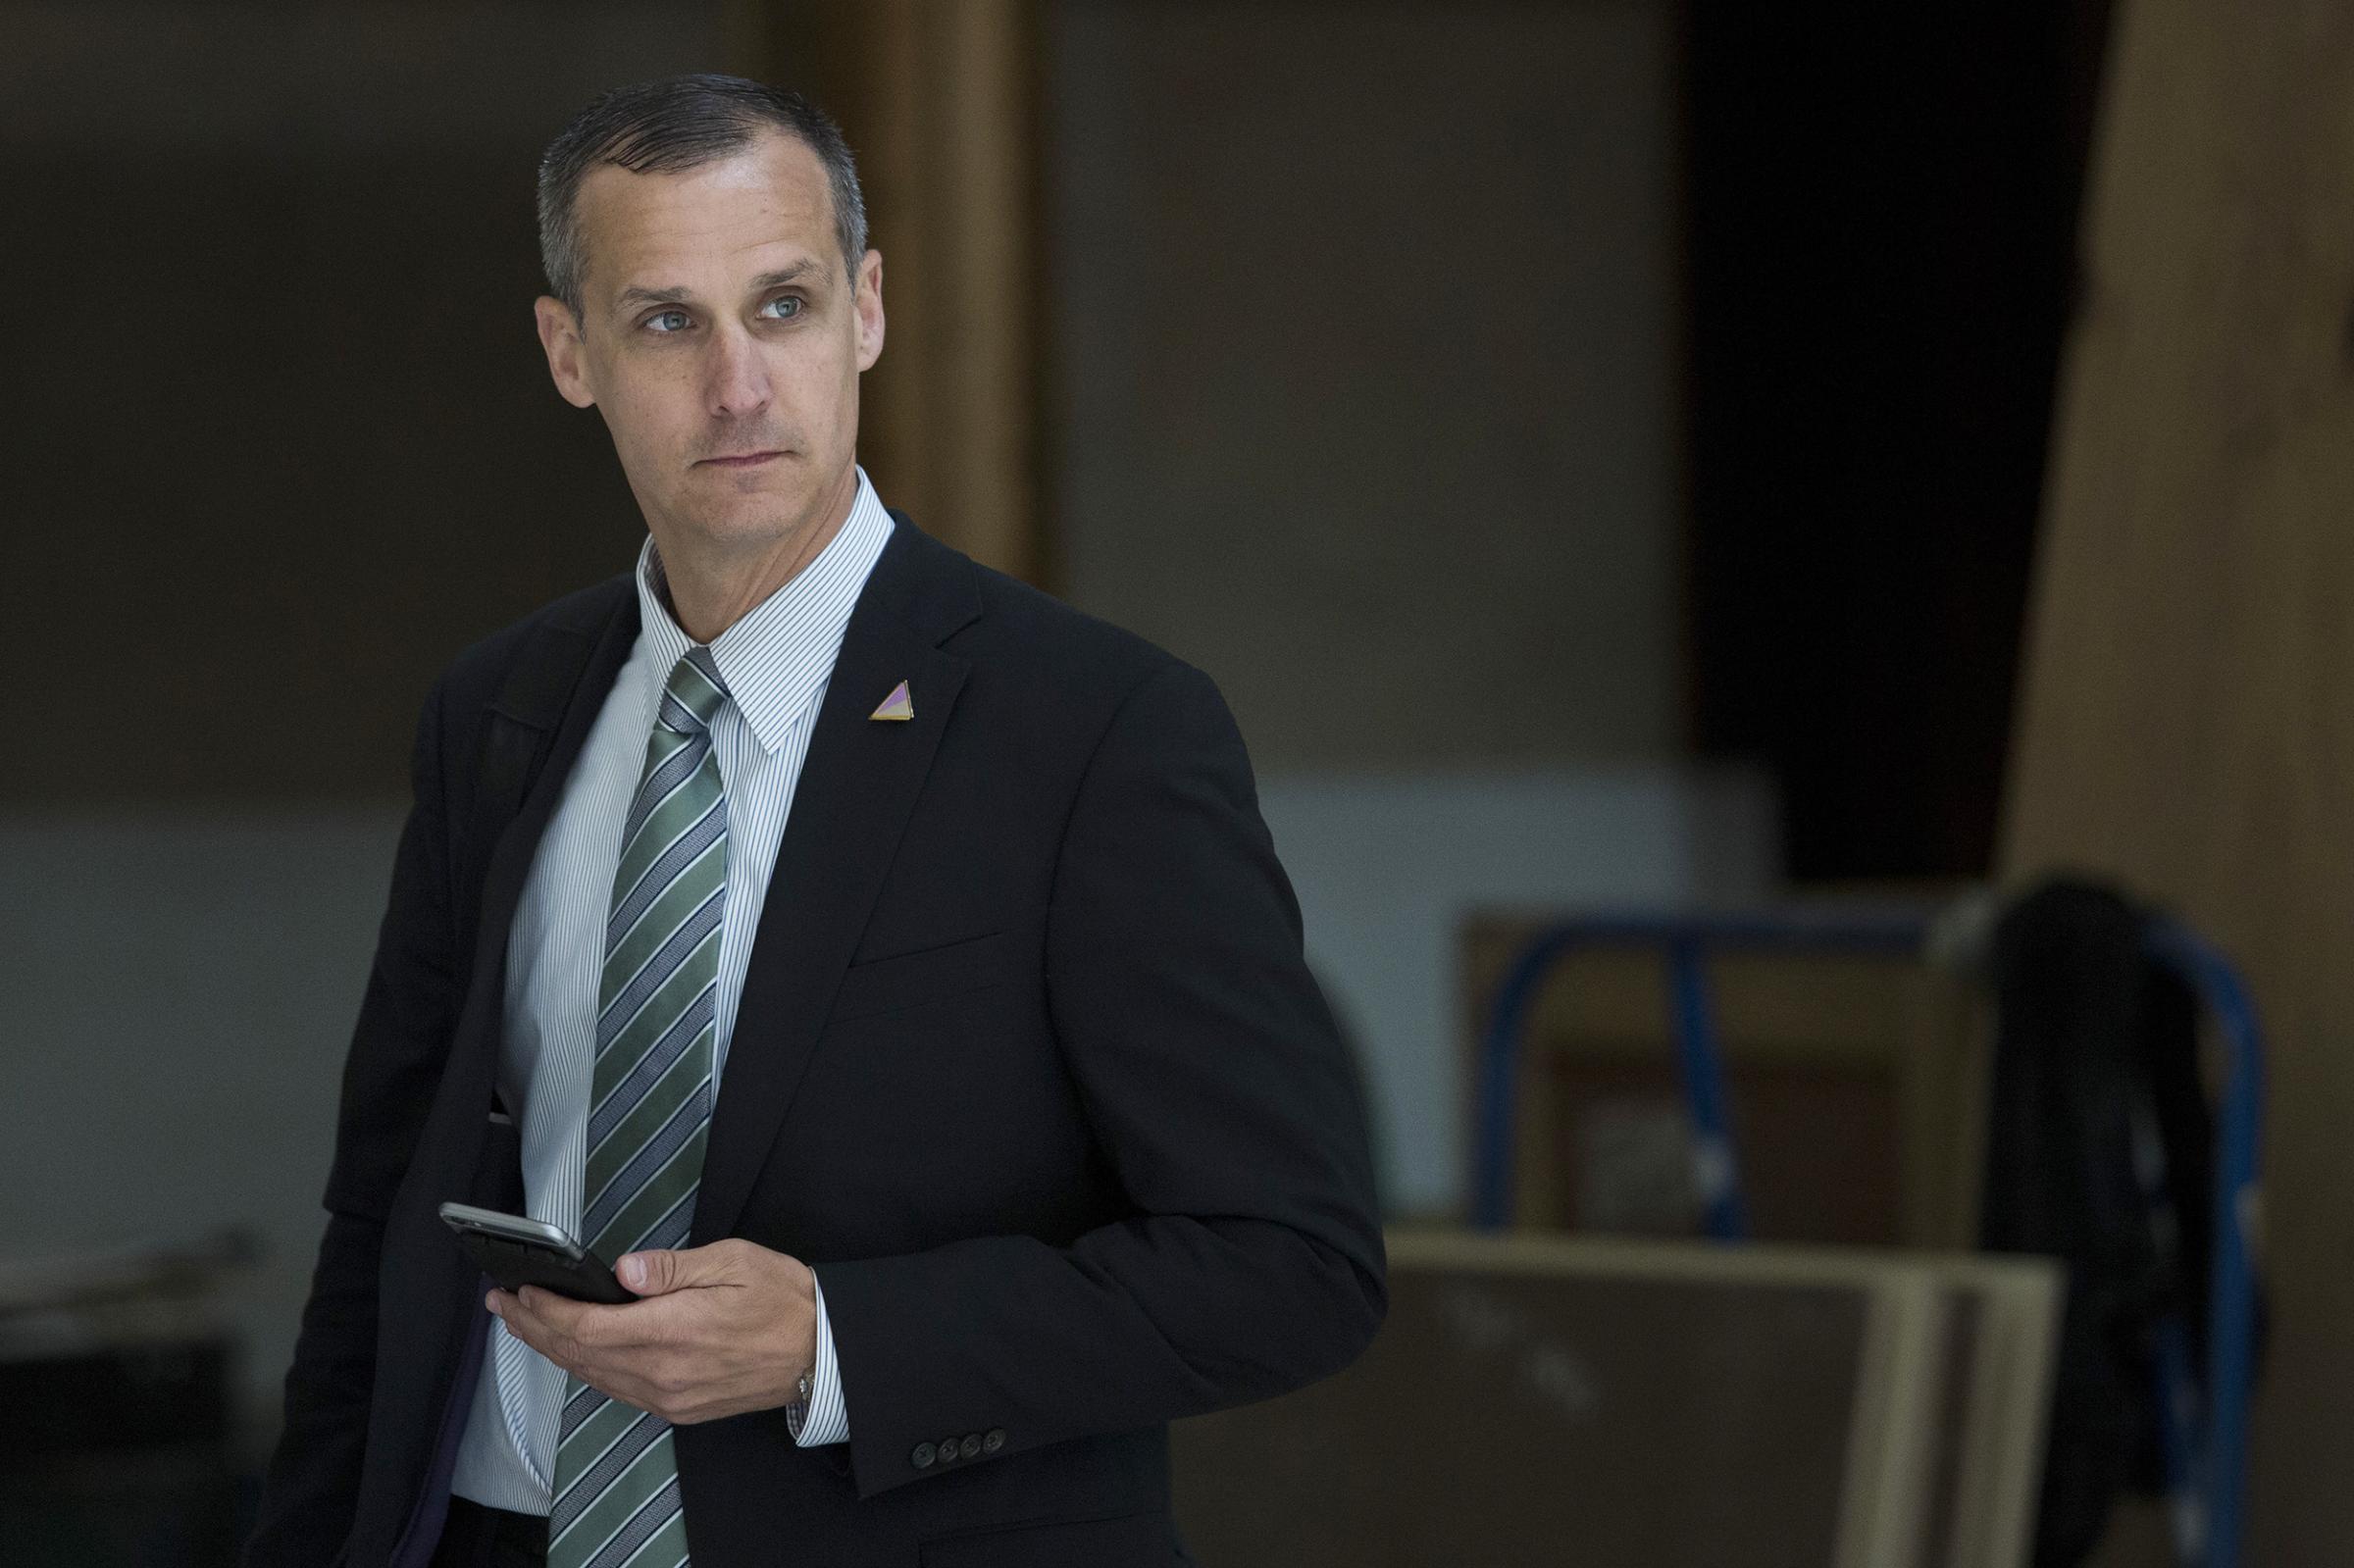 Corey Lewandowski, campaign manager for 2016 Republican presidential candidate Donald Trump, listens as Trump speaks at the Trump International Hotel Washington DC on March 16, 2016.